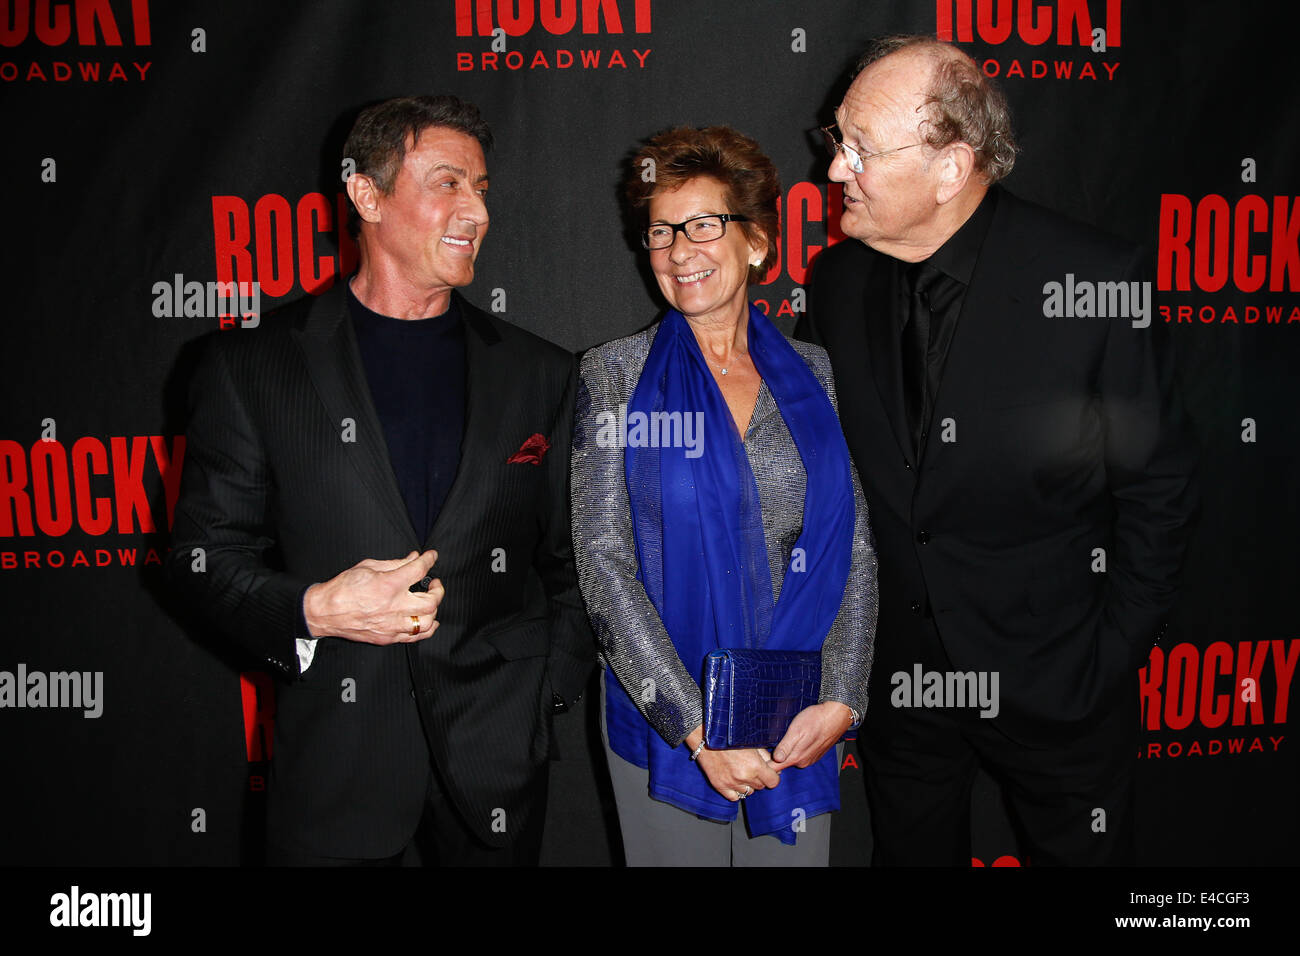 (L-R) Actor Sylvester Stallone, Janine Van Den Ende and producer Joop Van Den Ende attend the 'Rocky' Broadway opening night. Stock Photo